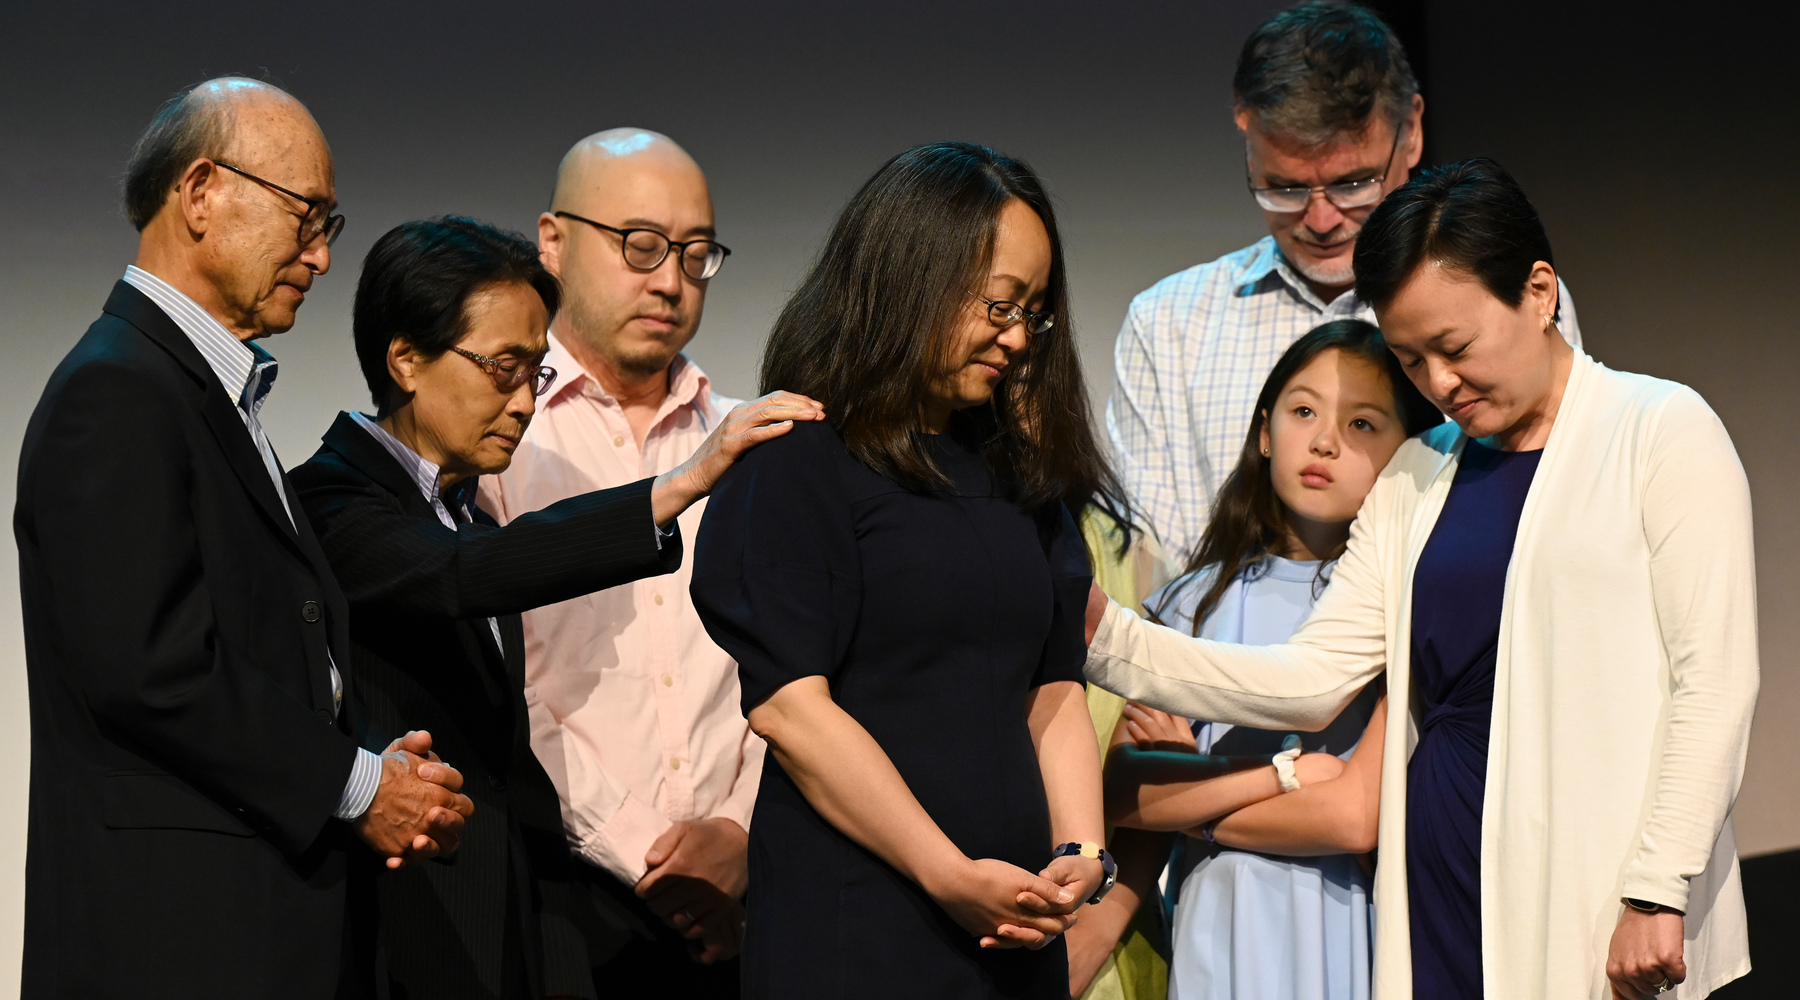 The Rev. Jihyun Oh is joined by her family on the platform to lay hands on her and participate in the litany of her installation as the next Stated Clerk of the General Assembly during the fourth plenary meeting on July 1, 2024. Photo by Rich Copley